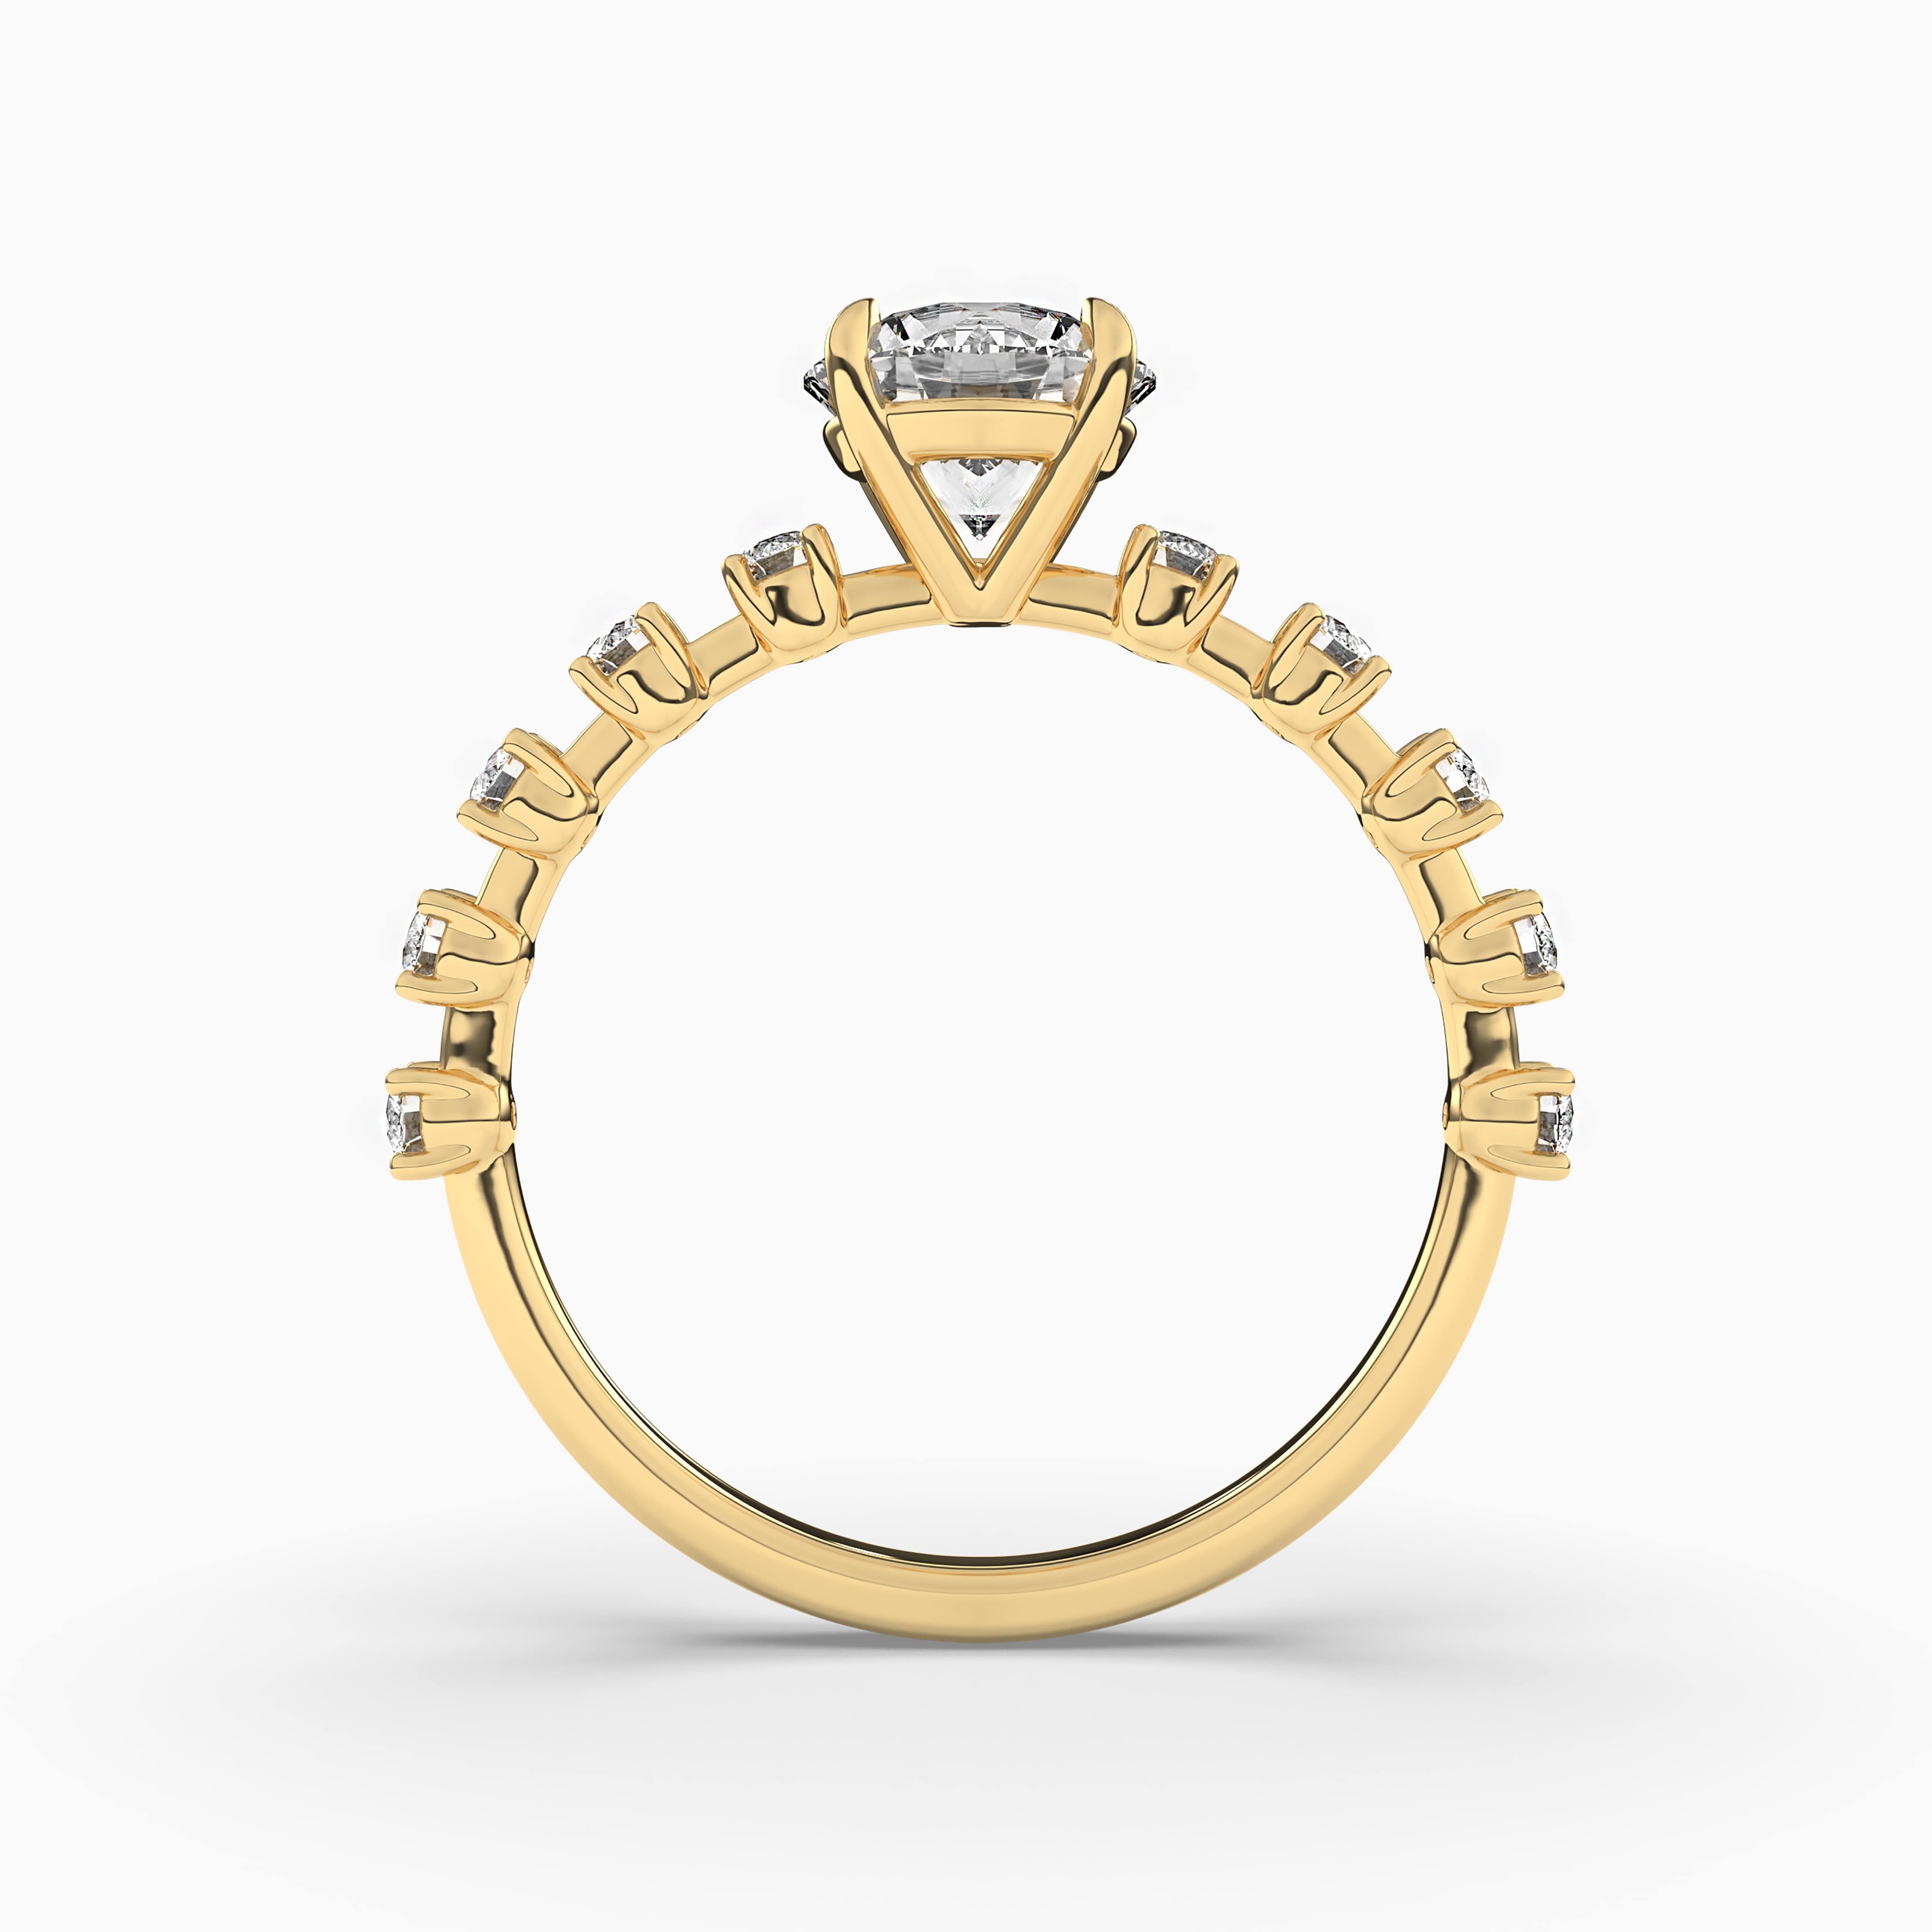 YELLOW GOLD RING FEATURING ROUND DIAMONDS AND RUBY